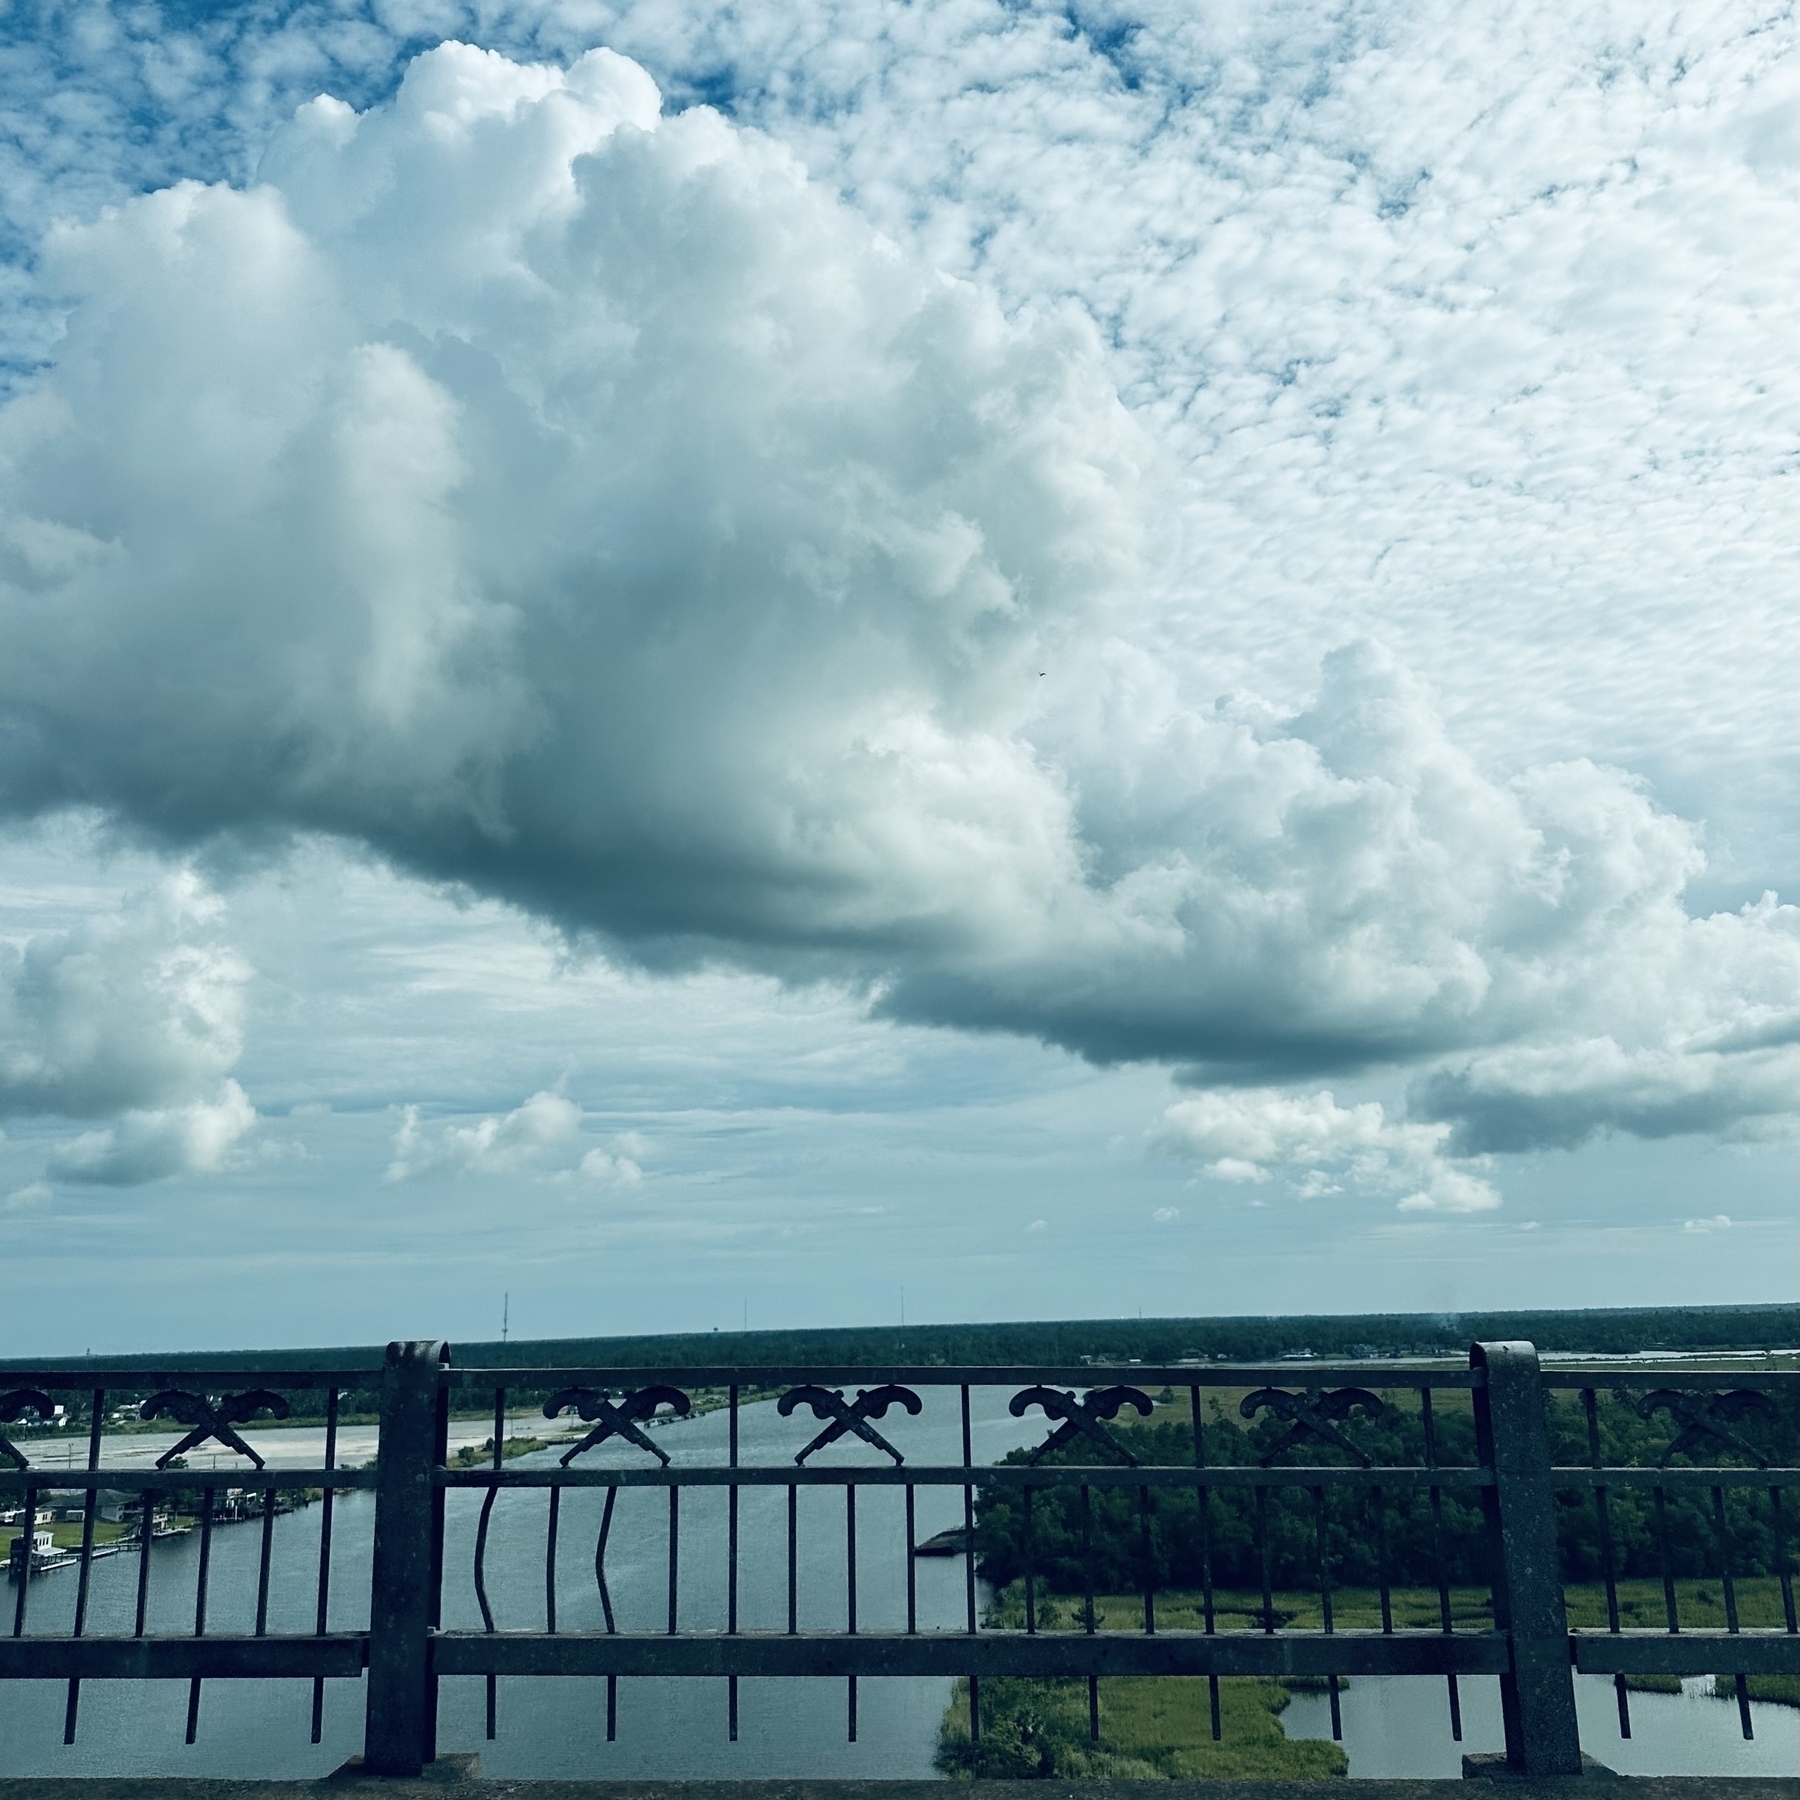 View driving over the bridge with clouds.